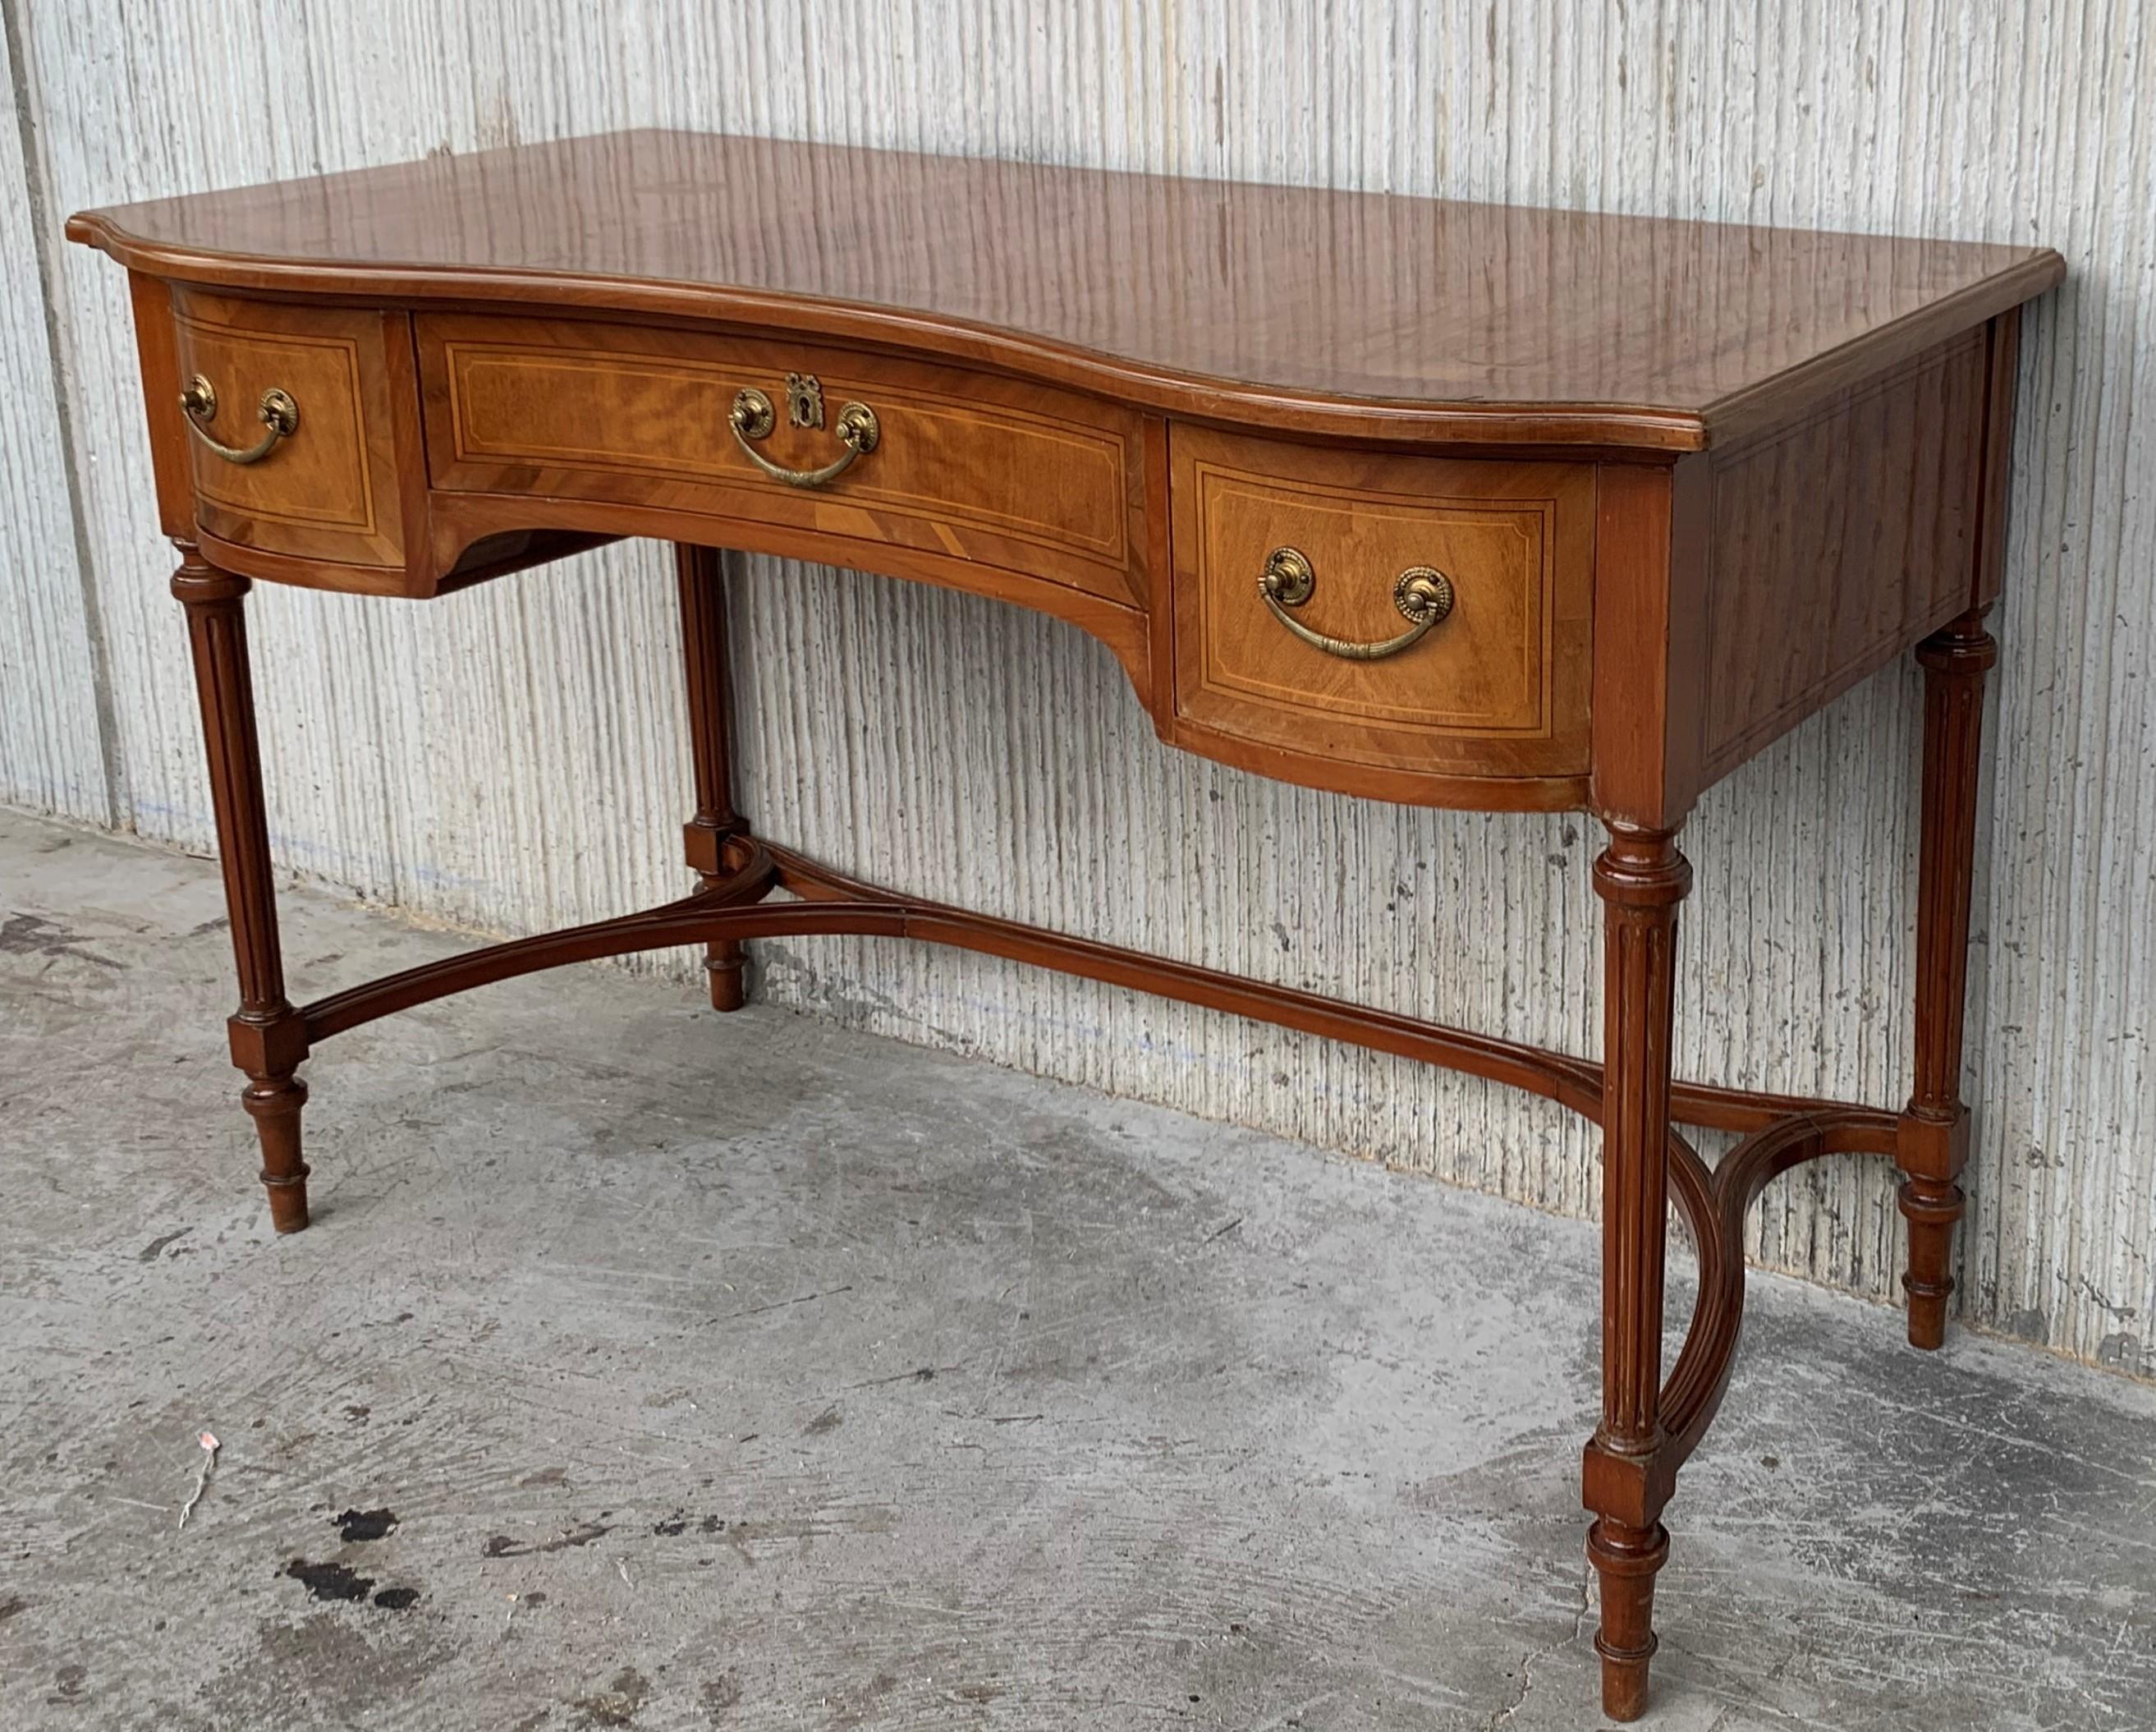 Louis XVI 20th Century French Louis XV Style Carved Cherry Desk with Three Drawers